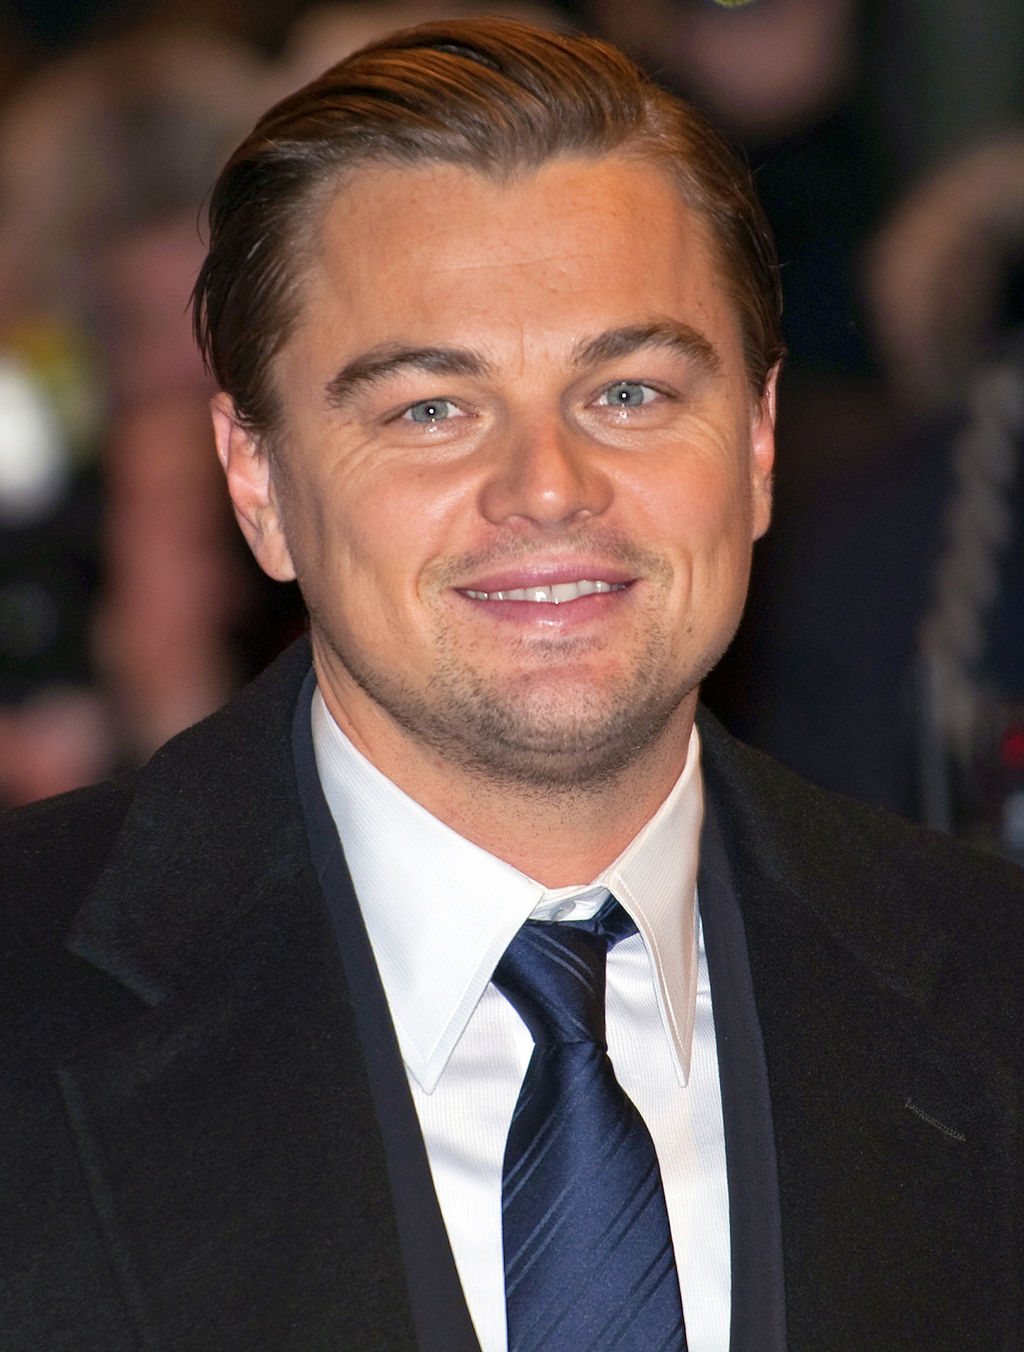 Leonardo DiCaprio - When Leonardo DiCaprio moved out to Hollywood to pursue his dreams, the city did not necessarily embrace him. Before his big break he fell into poverty with some shady characters and even criminals. It seems like it was worth it for Leo though, his net worth is estimated to be around 200 million.